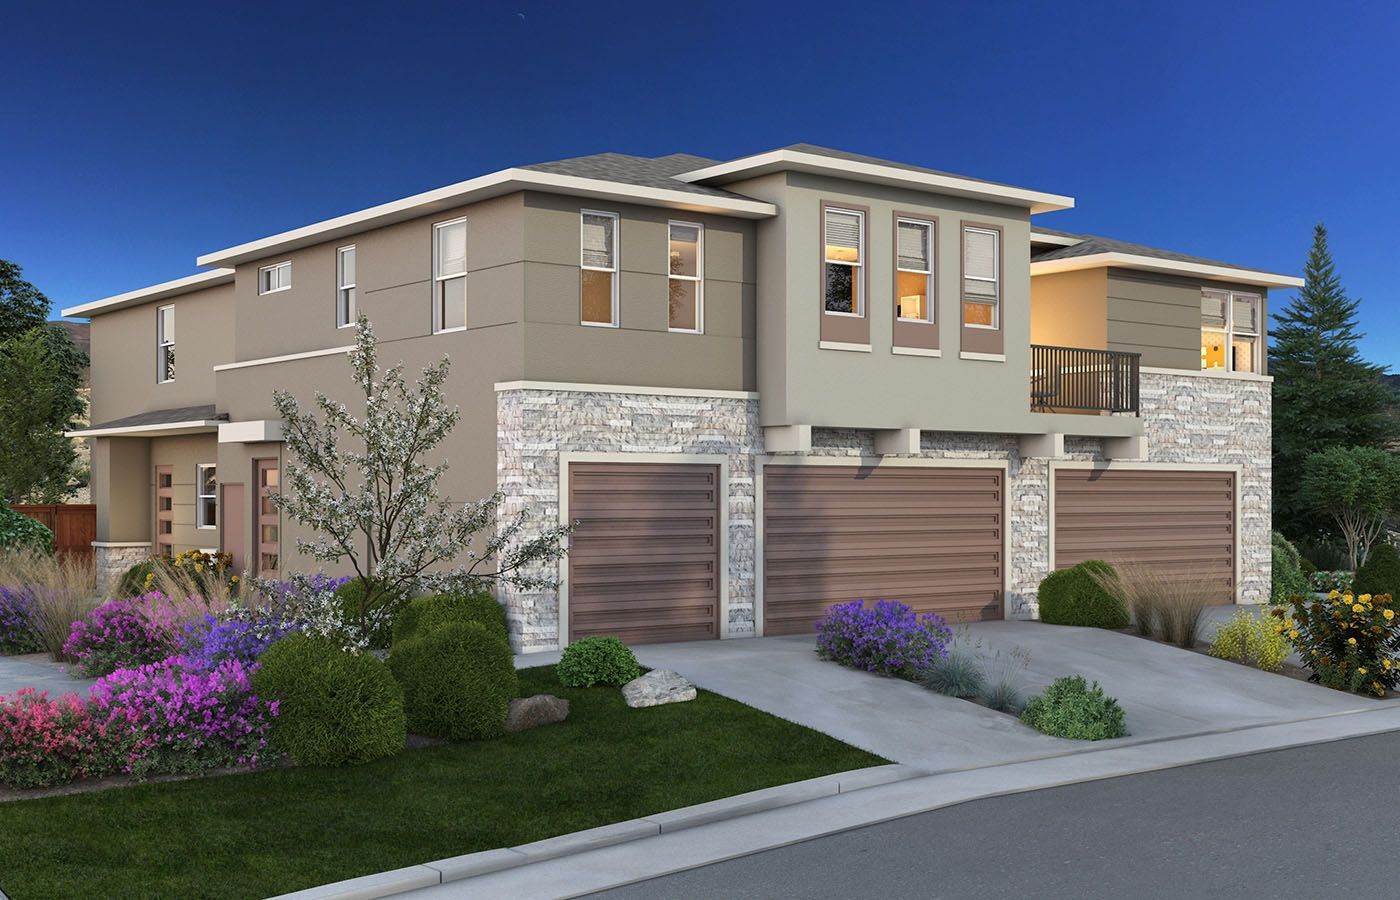 3. Village South at Valley Knolls xây dựng tại 299 Radiant Drive, Carson City, NV 89705